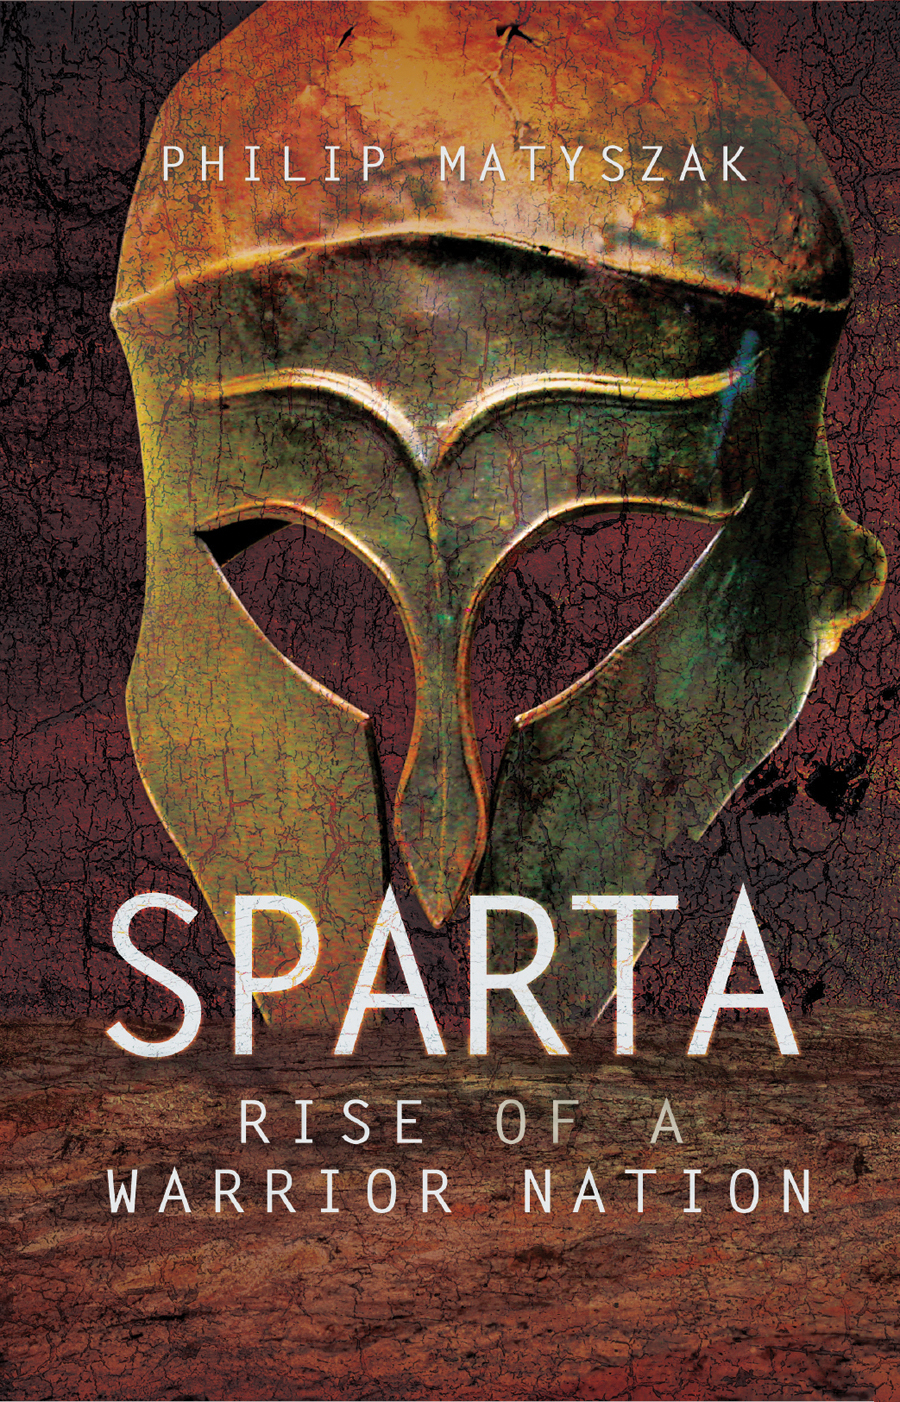 Sparta rise of a warrior nation - image 1